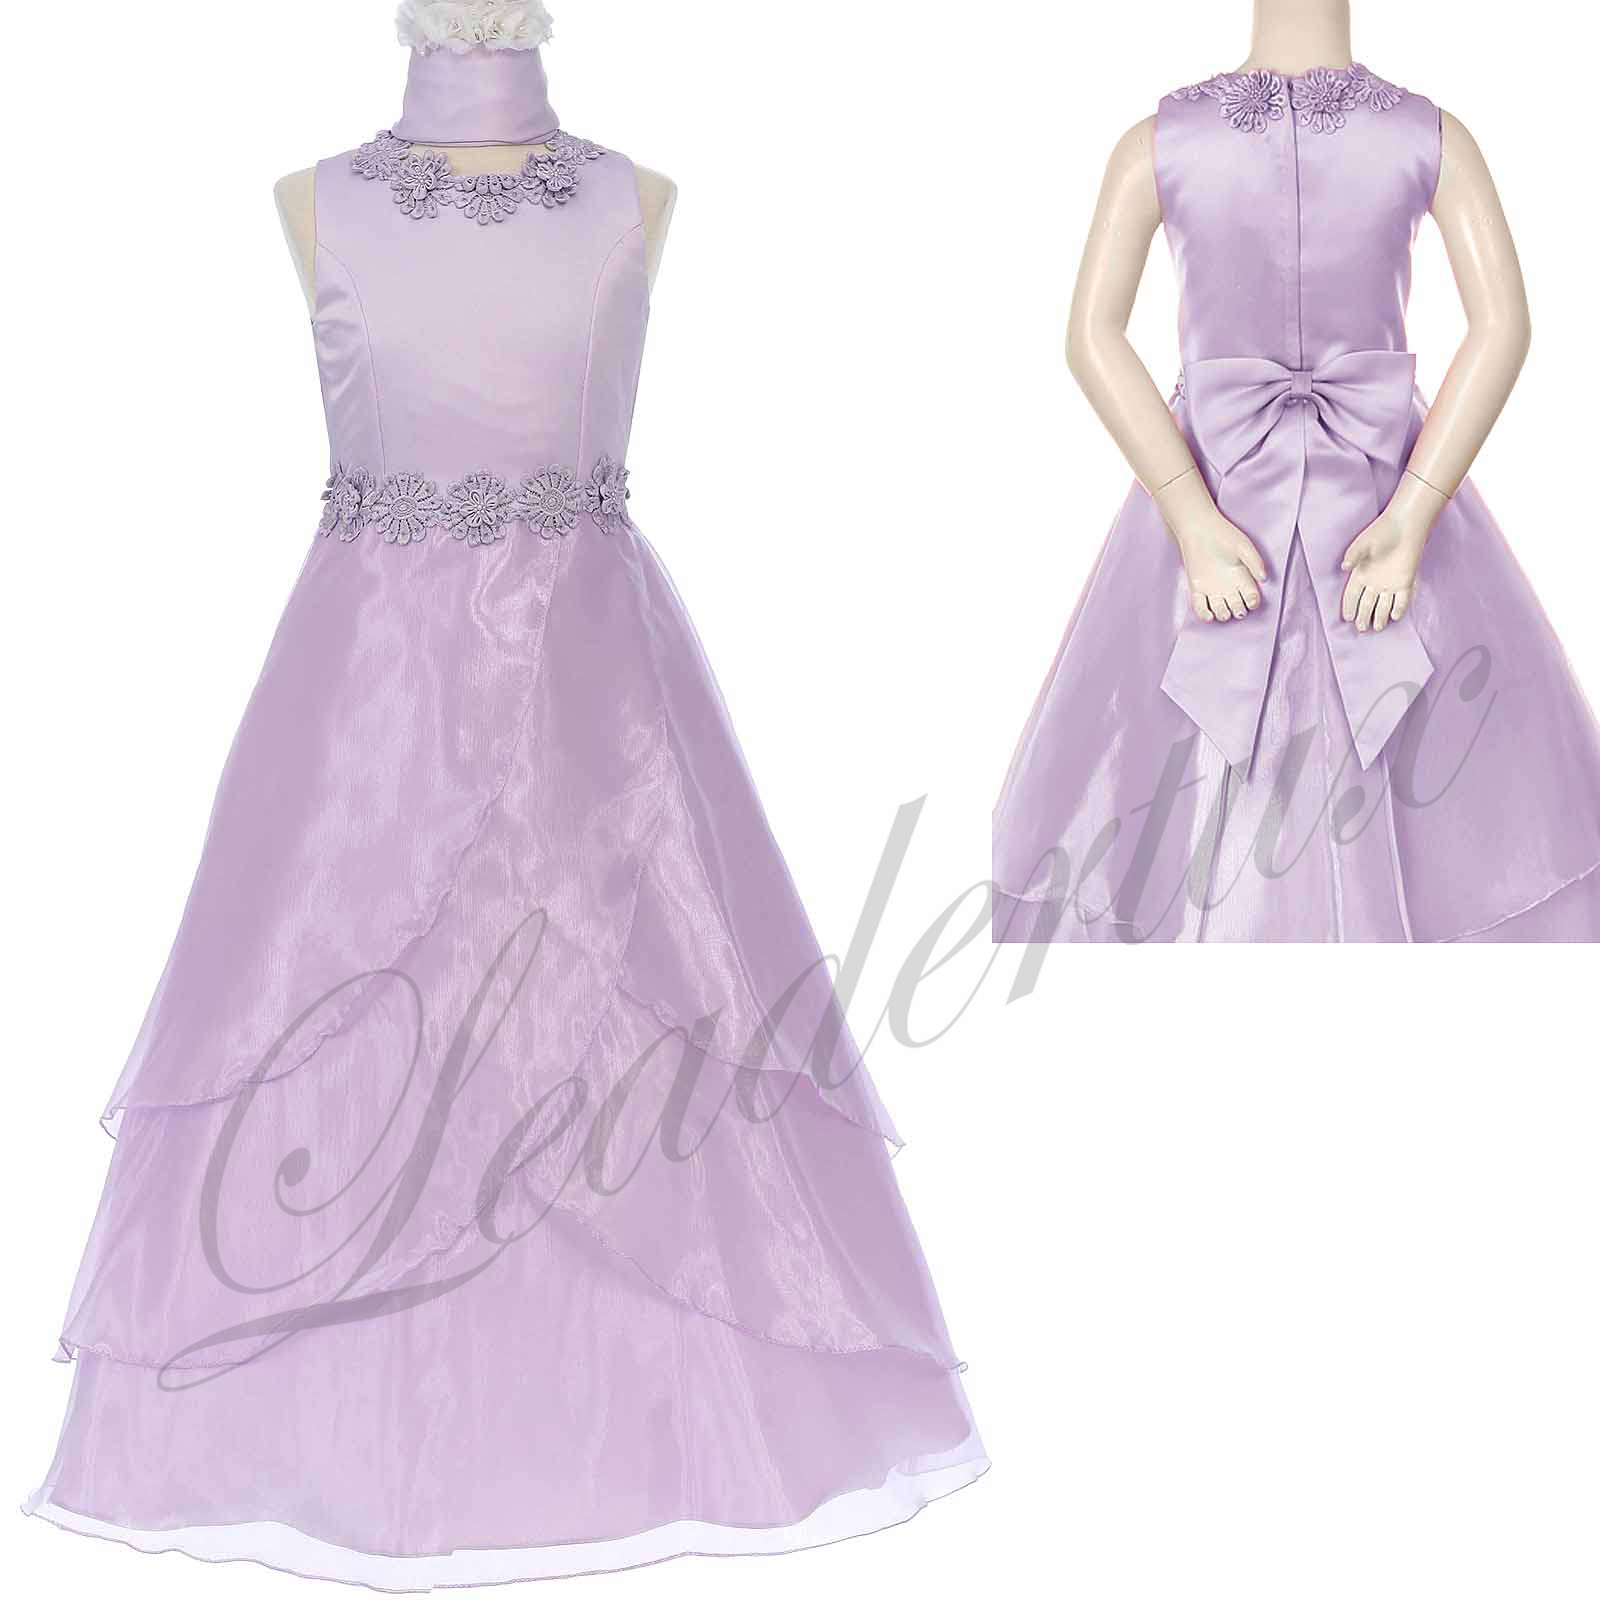 Leadertux New Lavender 4 6 8 Little Girl National Pageant Wedding Easter Formal Party Graduation Birthday Dress